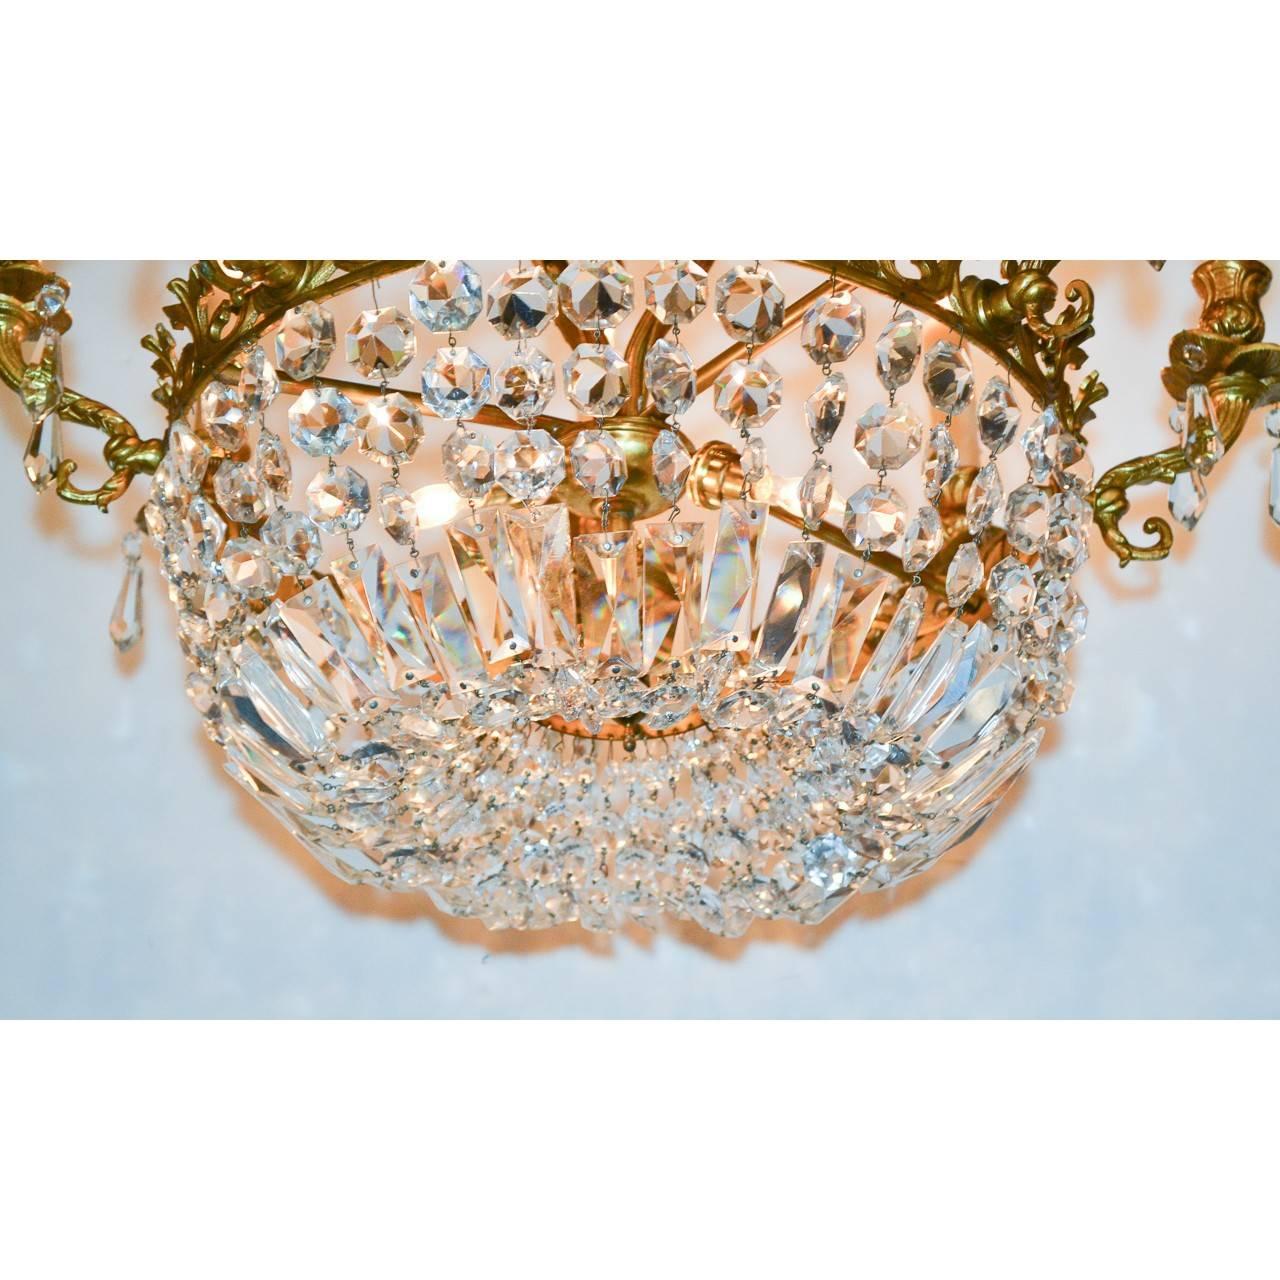 Stunning French bronze chandelier with basket of beautiful cascading crystals,
circa 1920.